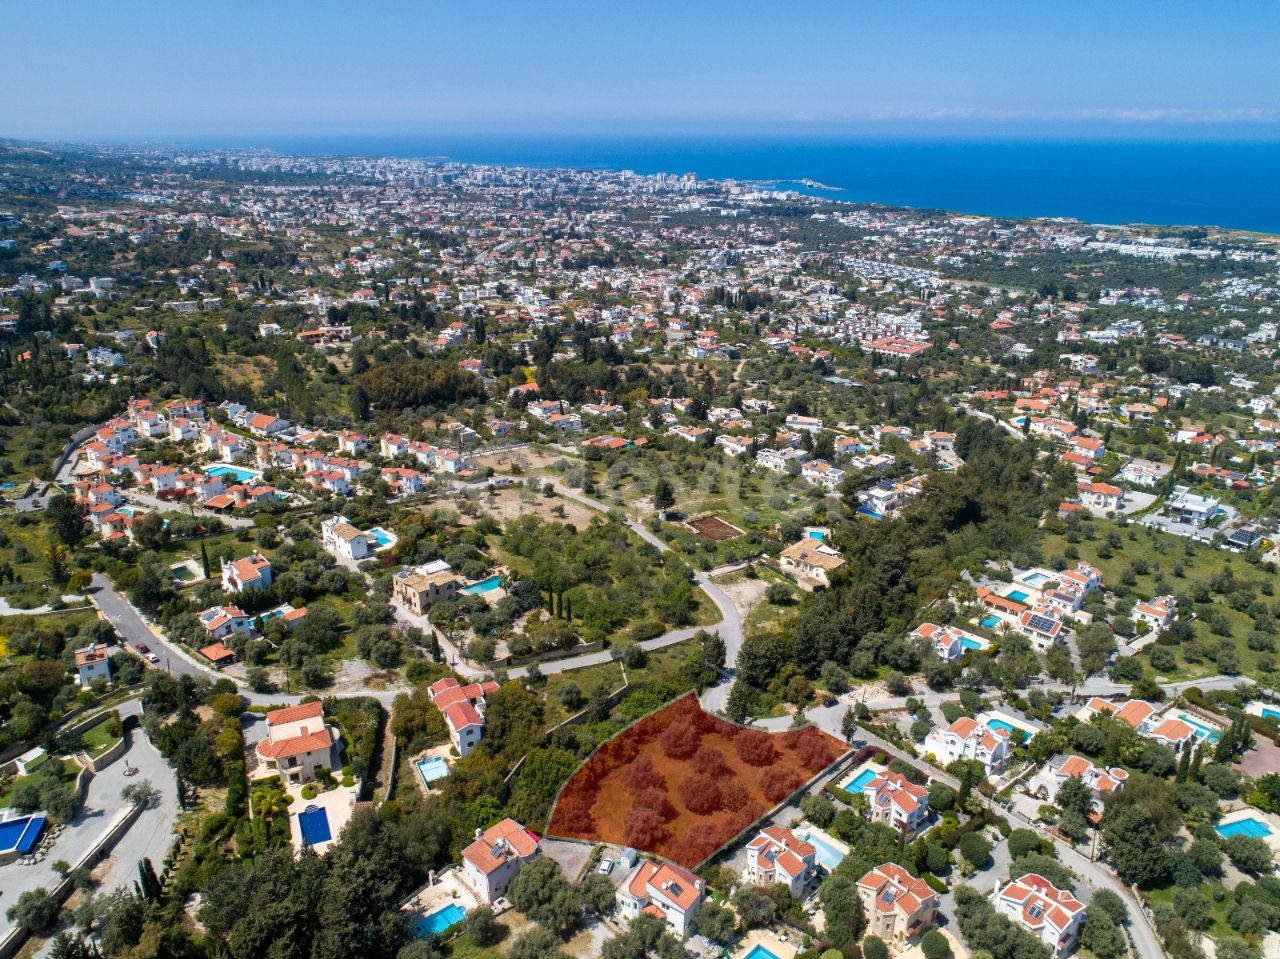 Land For Sale in Girne Bellapais